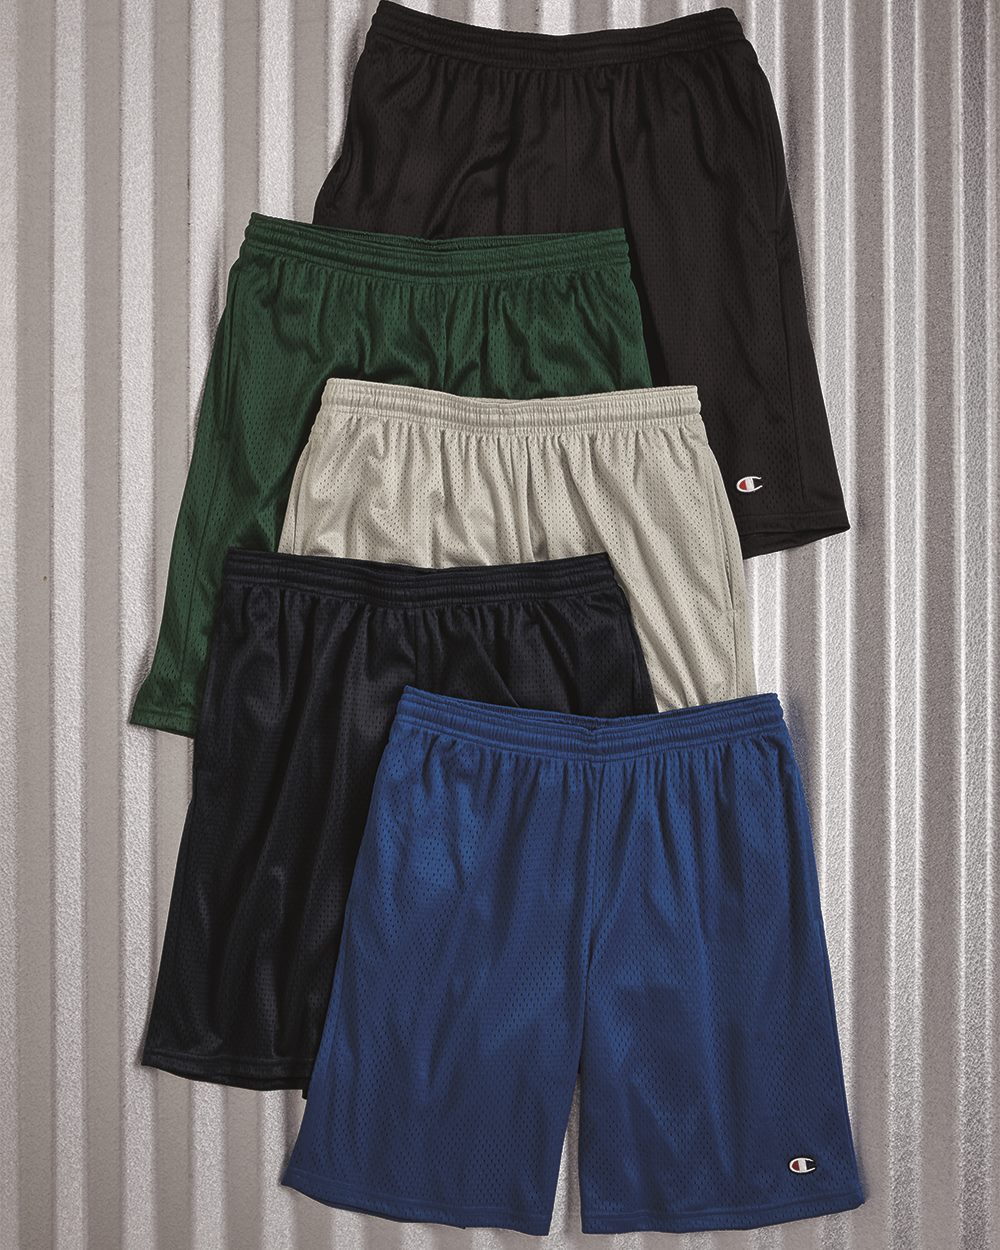 champion men's rugby shorts with pockets